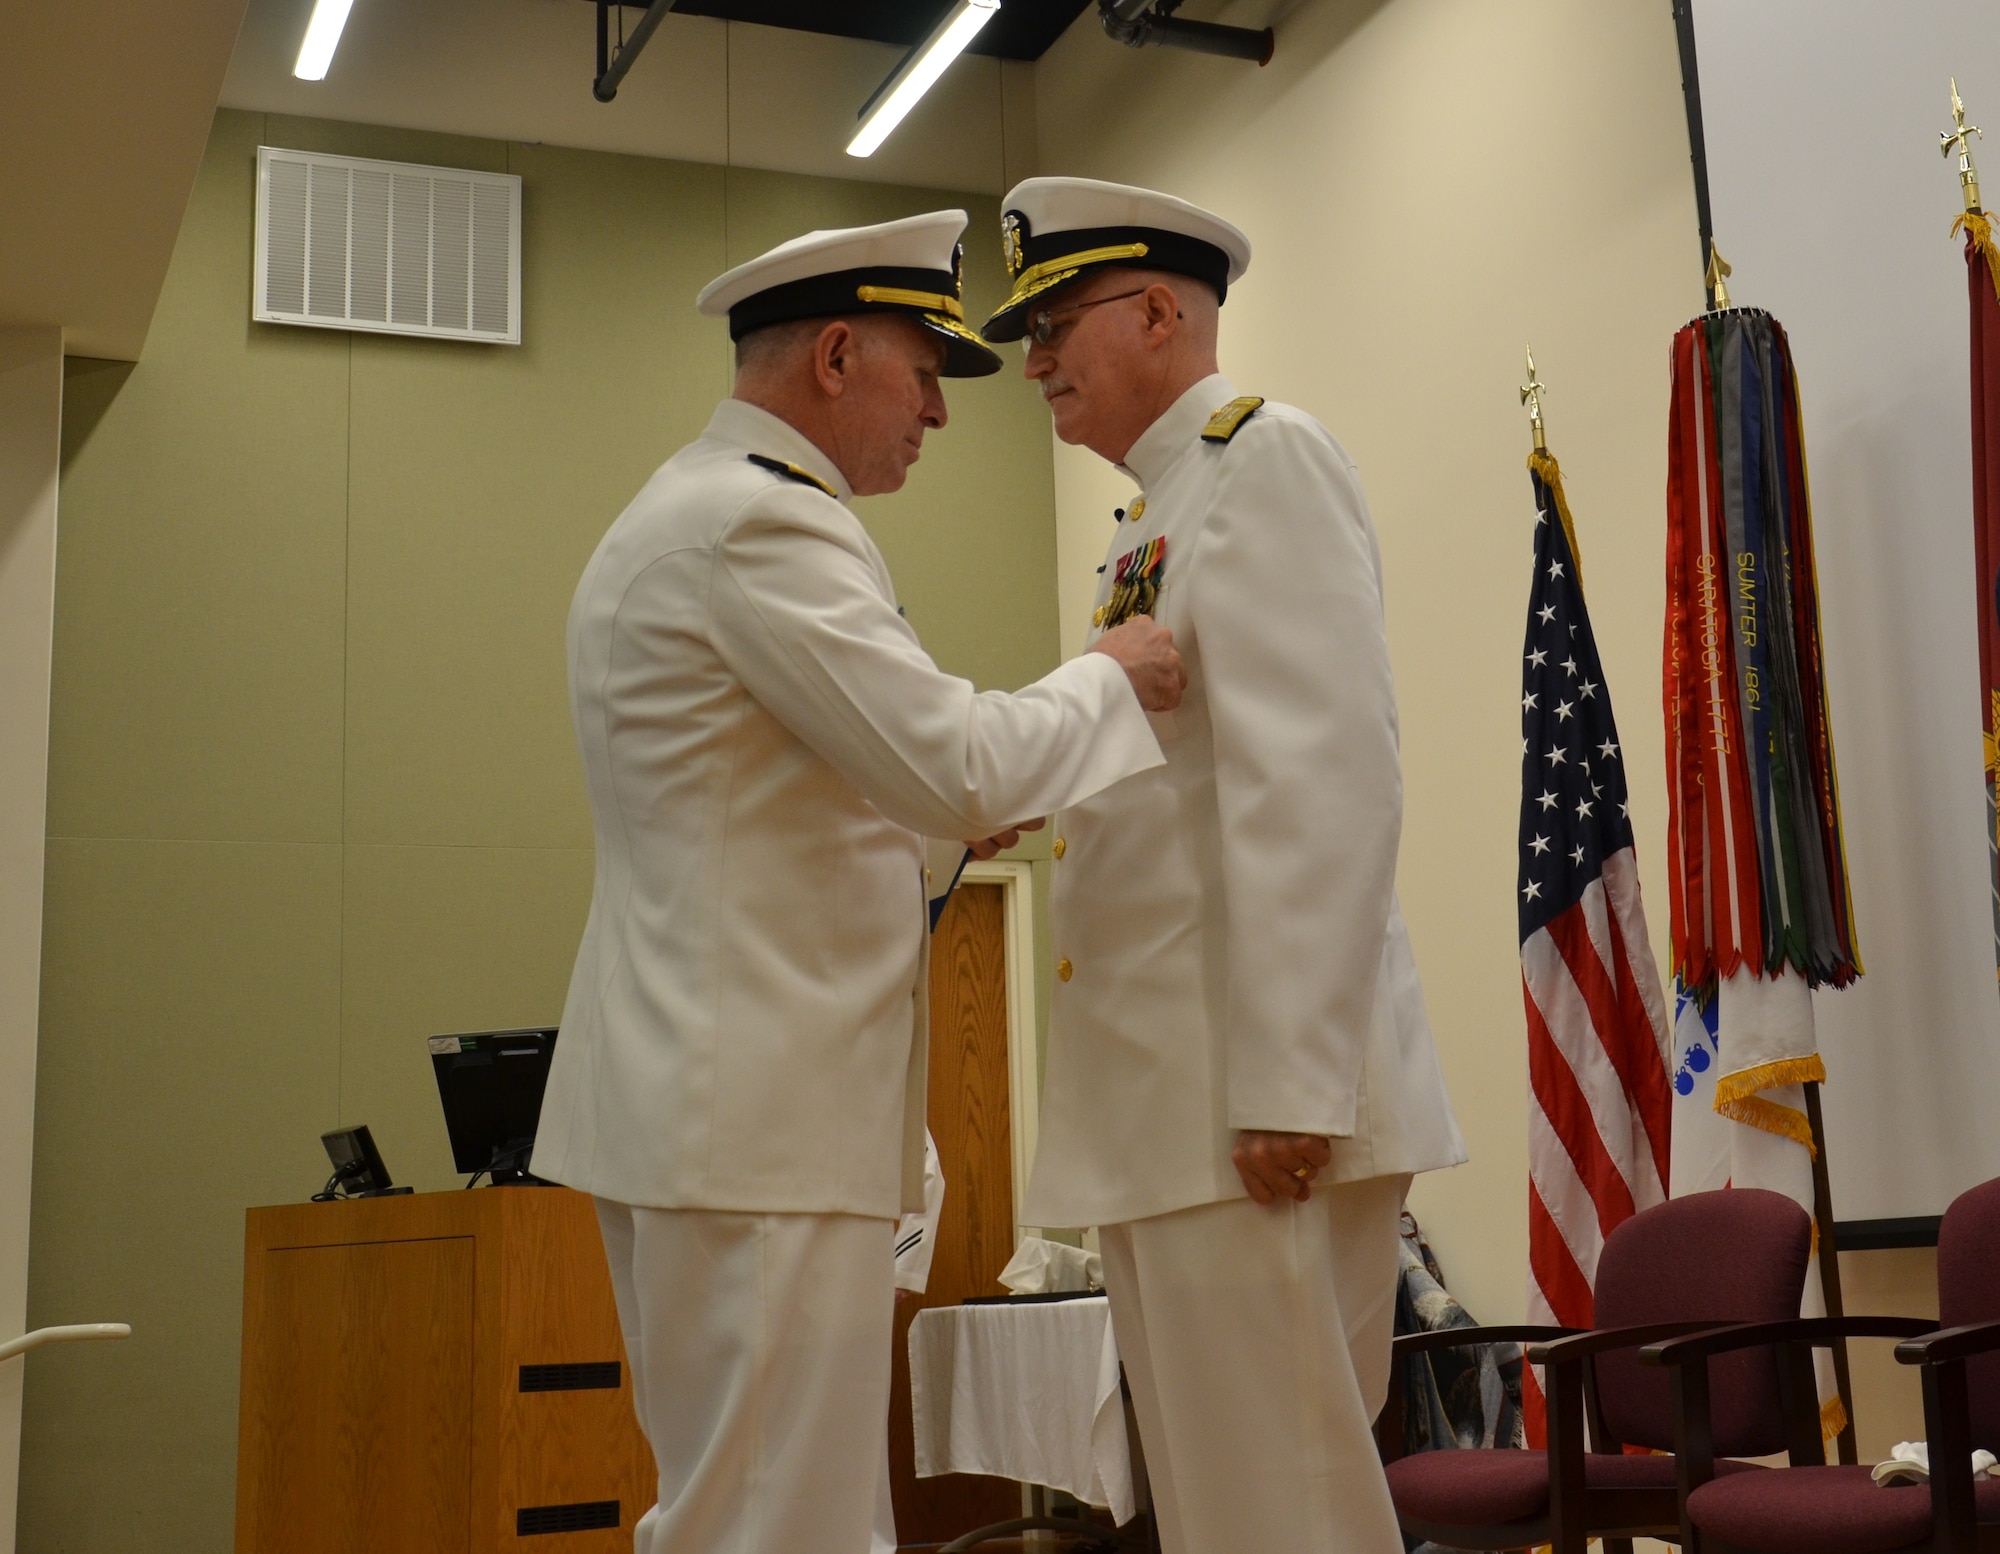 Joint Base San Antonio-Fort Sam Houston, Texas,  Vice Adm. Matthew Nathan, surgeon general of the Navy, and Bureau of Medicine and Surgery chief, awards the Legion of Merit to Rear Adm. Bob Kiser during his retirement ceremony June 15. Kiser, the first commandant of the Medical Education and Training Campus, retired after 38 years of combined reserve and active duty service. (U.S. Navy photo by Lisa Braun/released)